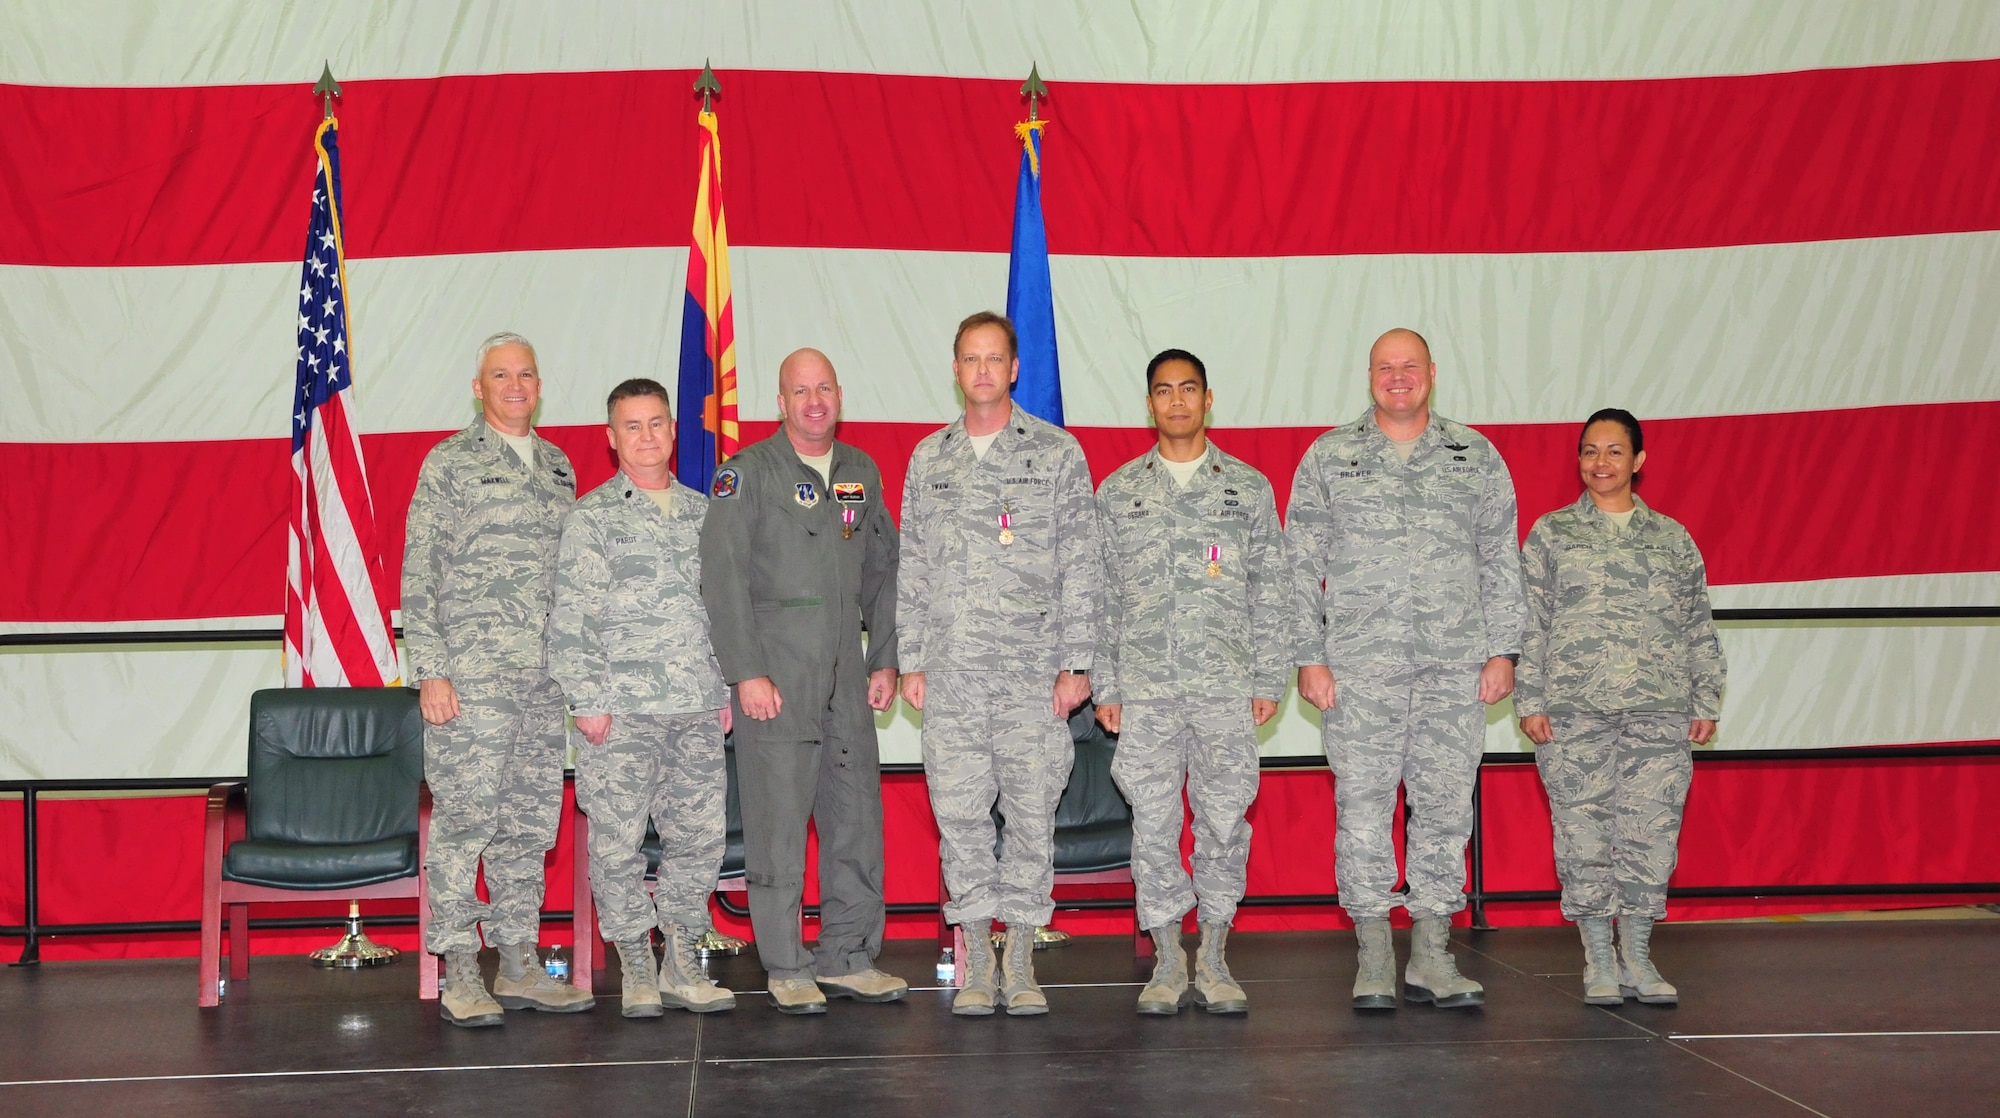 The 161st Air Refueling Wing, Phoenix Air National Guard Base, held its annual awards ceremony March 8.  The ceremony recognized members who received the federal Meritorious Service Medal.  This military decoration is awarded to the following Airmen for unique accomplishments in their particular fields, or for distinguished careers in the service of our country. From left, U.S. Air Force Brig. Gen. Edward Maxwell, commander of the Arizona Air National Guard, Lt. Col. Christopher Parot, Col. Hoyt Slocum, Lt. Col. Darcy Swaim, Maj. Gilbert Besana, Col. Gary Brewer, commander of the 161st Air Refueling Wing and Chief Master Sgt. Martha Garcia, 161st Air Refueling Wing command chief. (U. S. Air National Guard photo by Master Sgt. Kelly M. Deitloff)